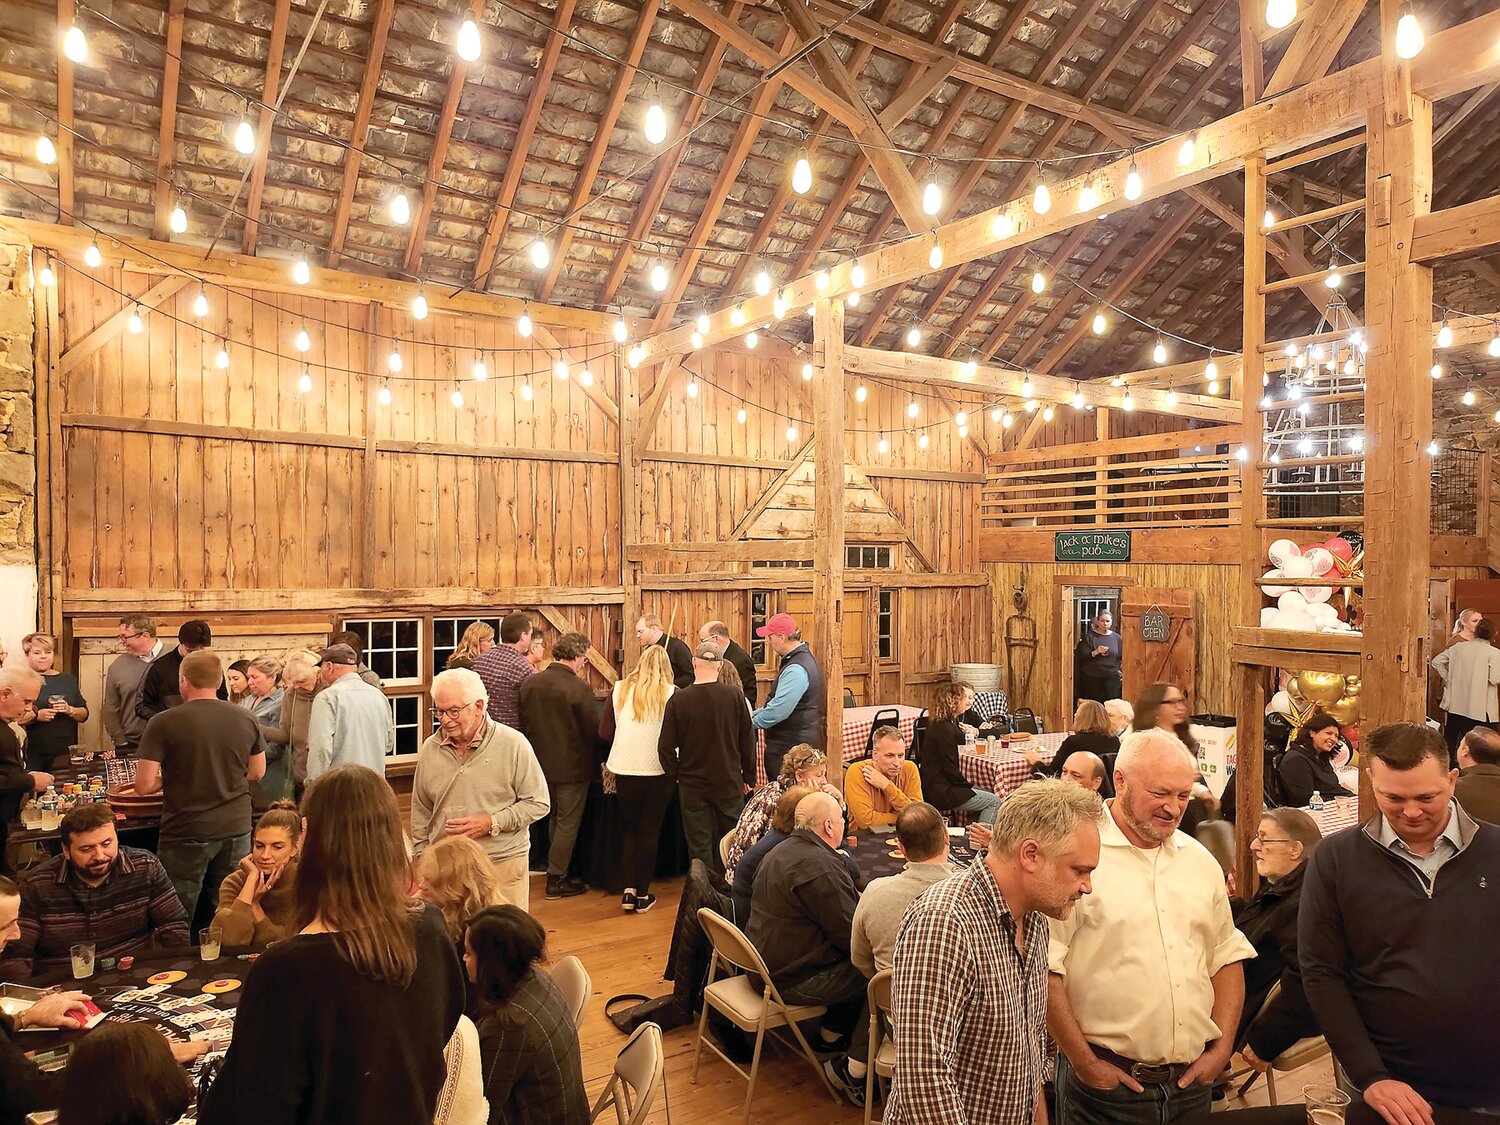 The Kin Casino Night fundraiser will take place in a renovated barn.